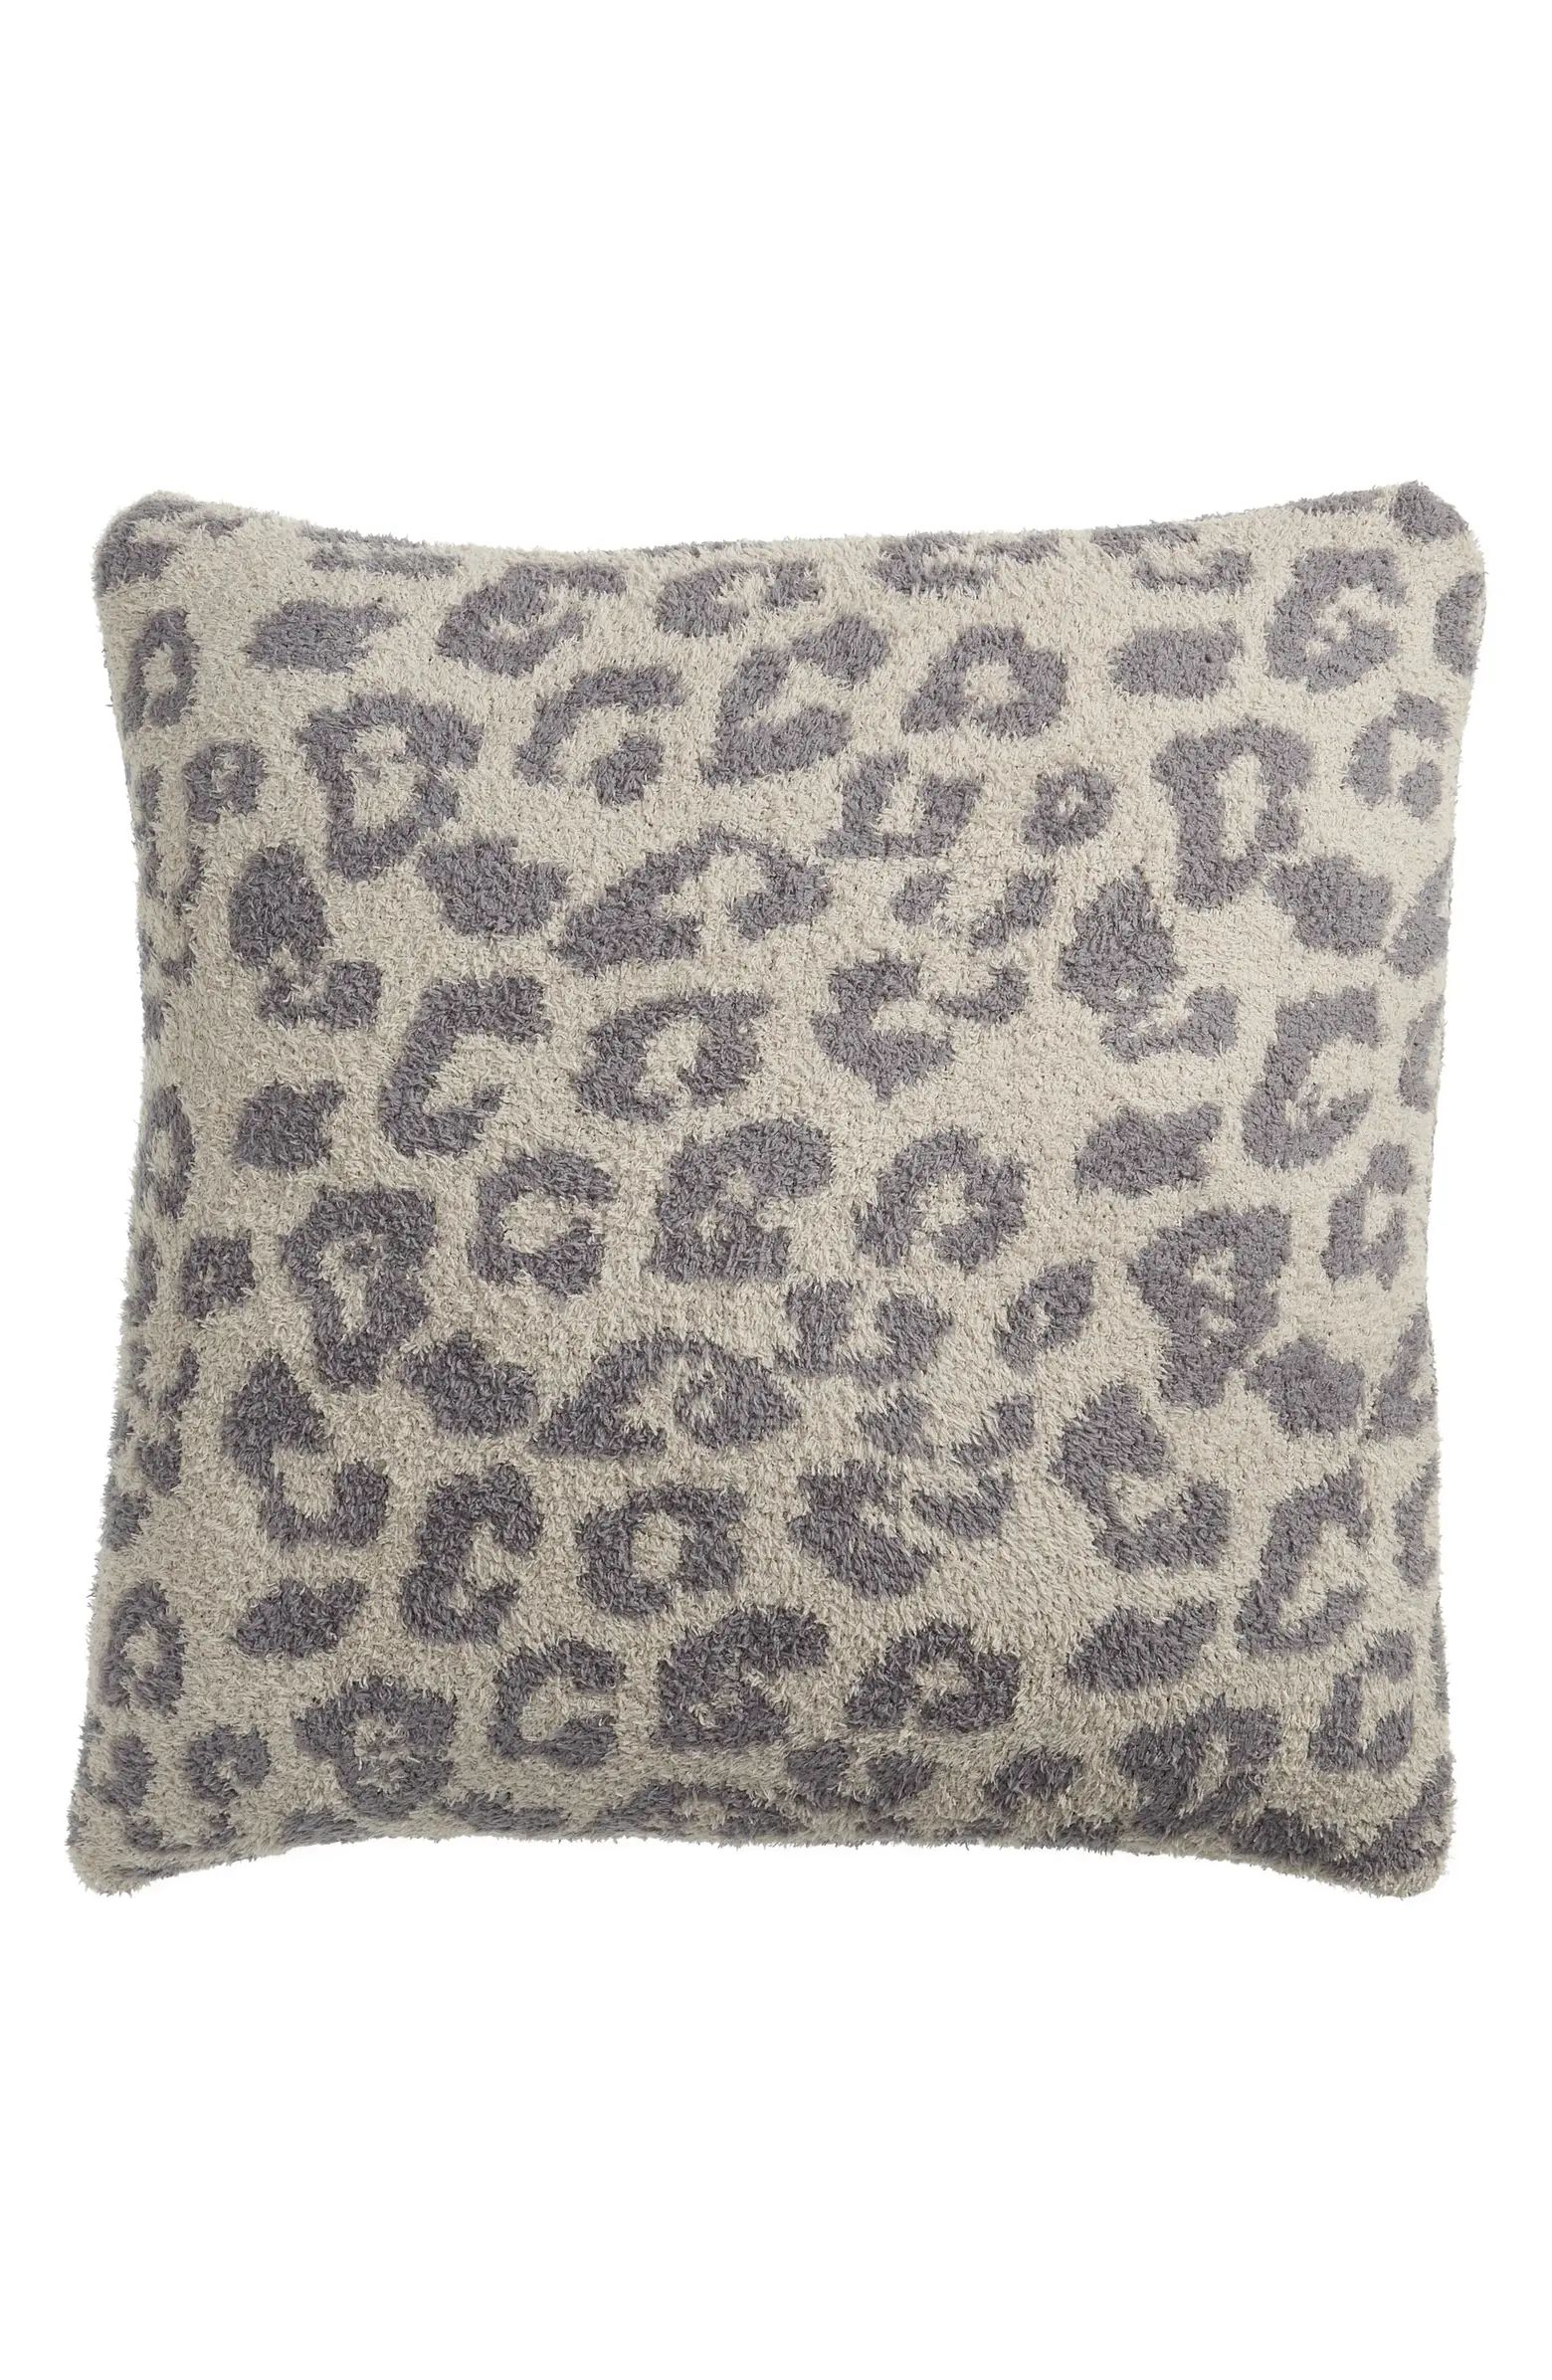 Barefoot Dreams® In the Wild CozyChic™ Accent Pillow | Nordstrom | Nordstrom